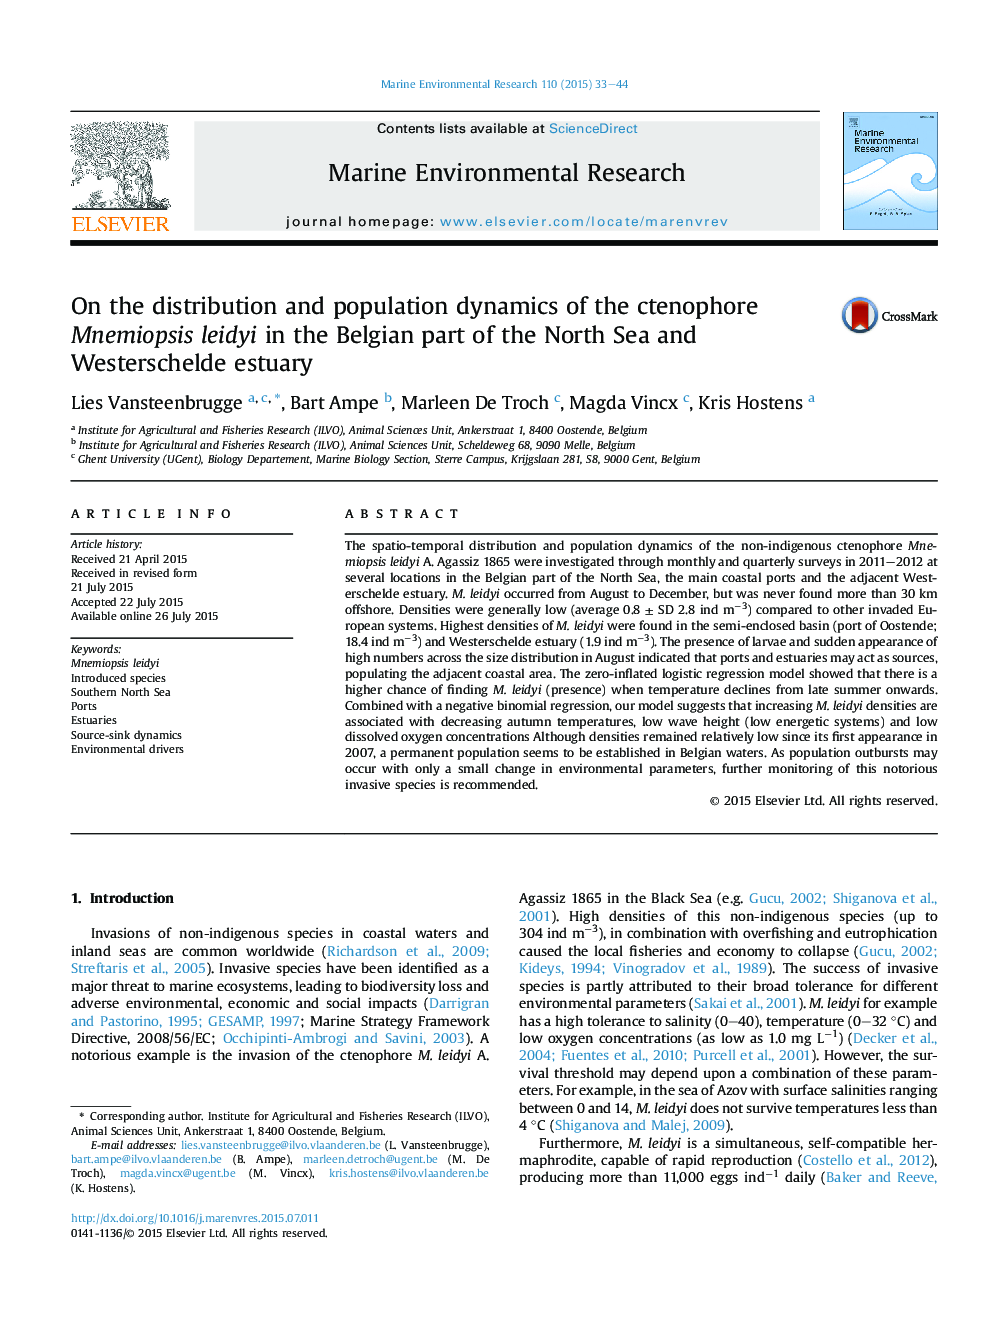 On the distribution and population dynamics of the ctenophore Mnemiopsis leidyi in the Belgian part of the North Sea and Westerschelde estuary